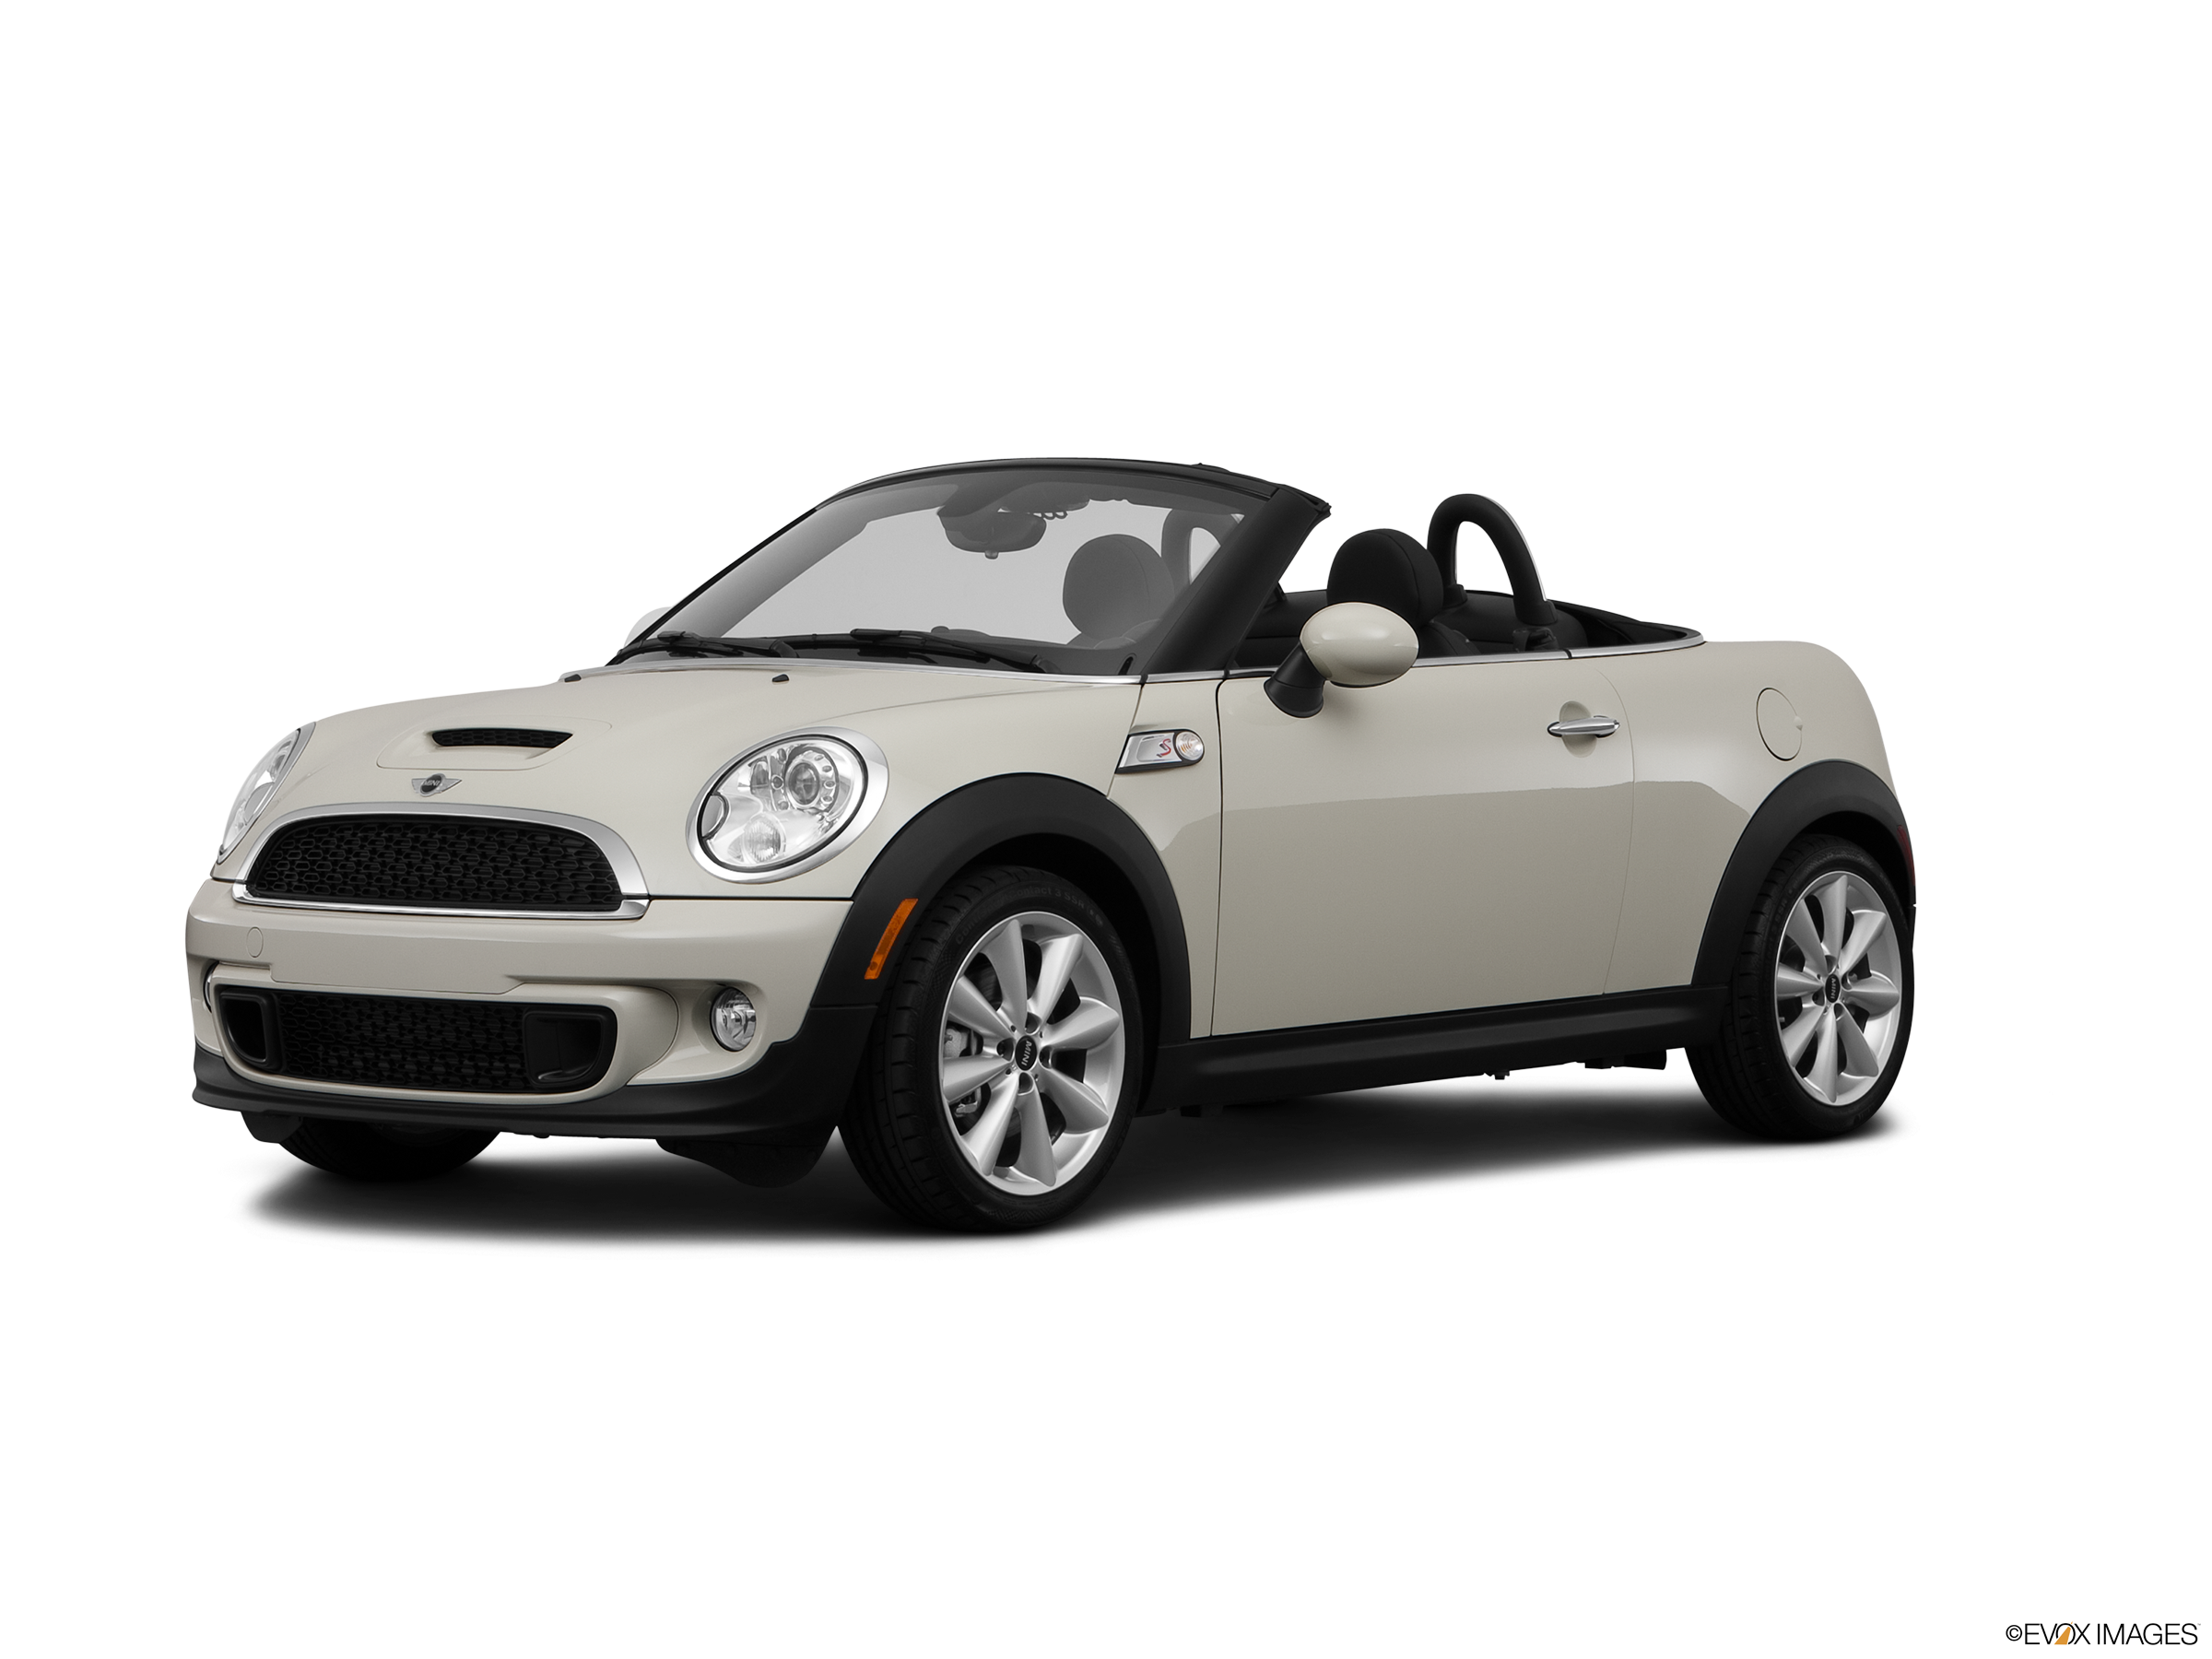 2013 MINI Roadster Values & Cars for Sale | Kelley Blue Book